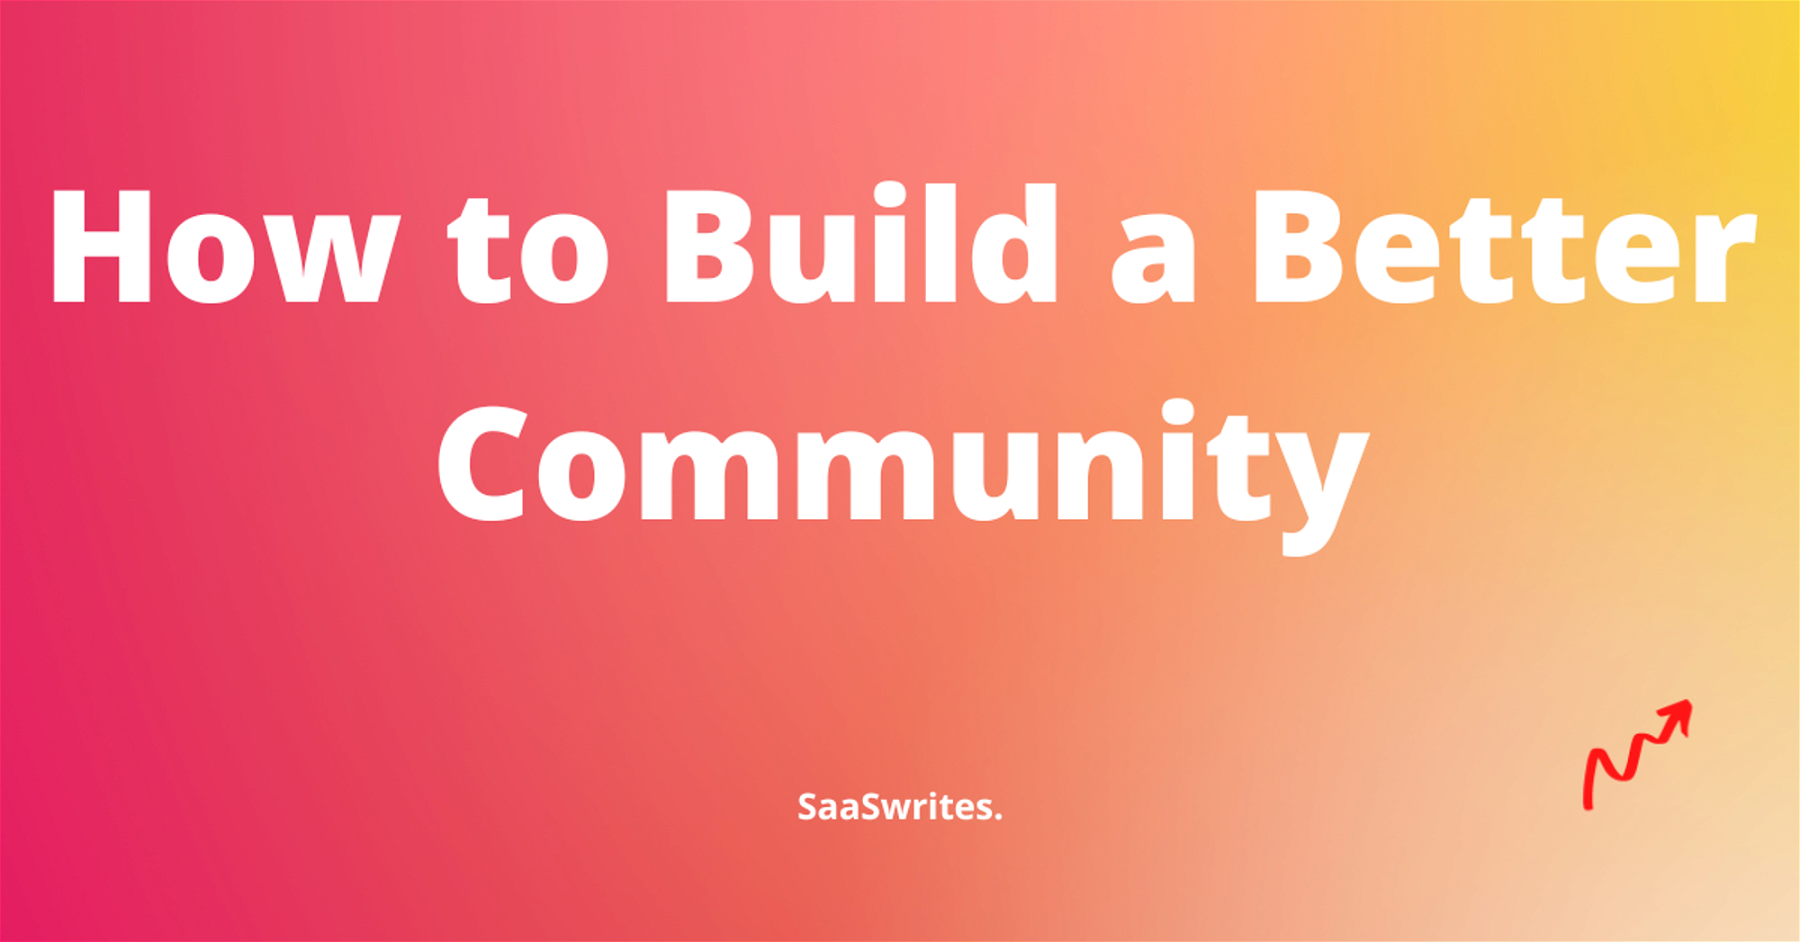 How to Build a Better Community